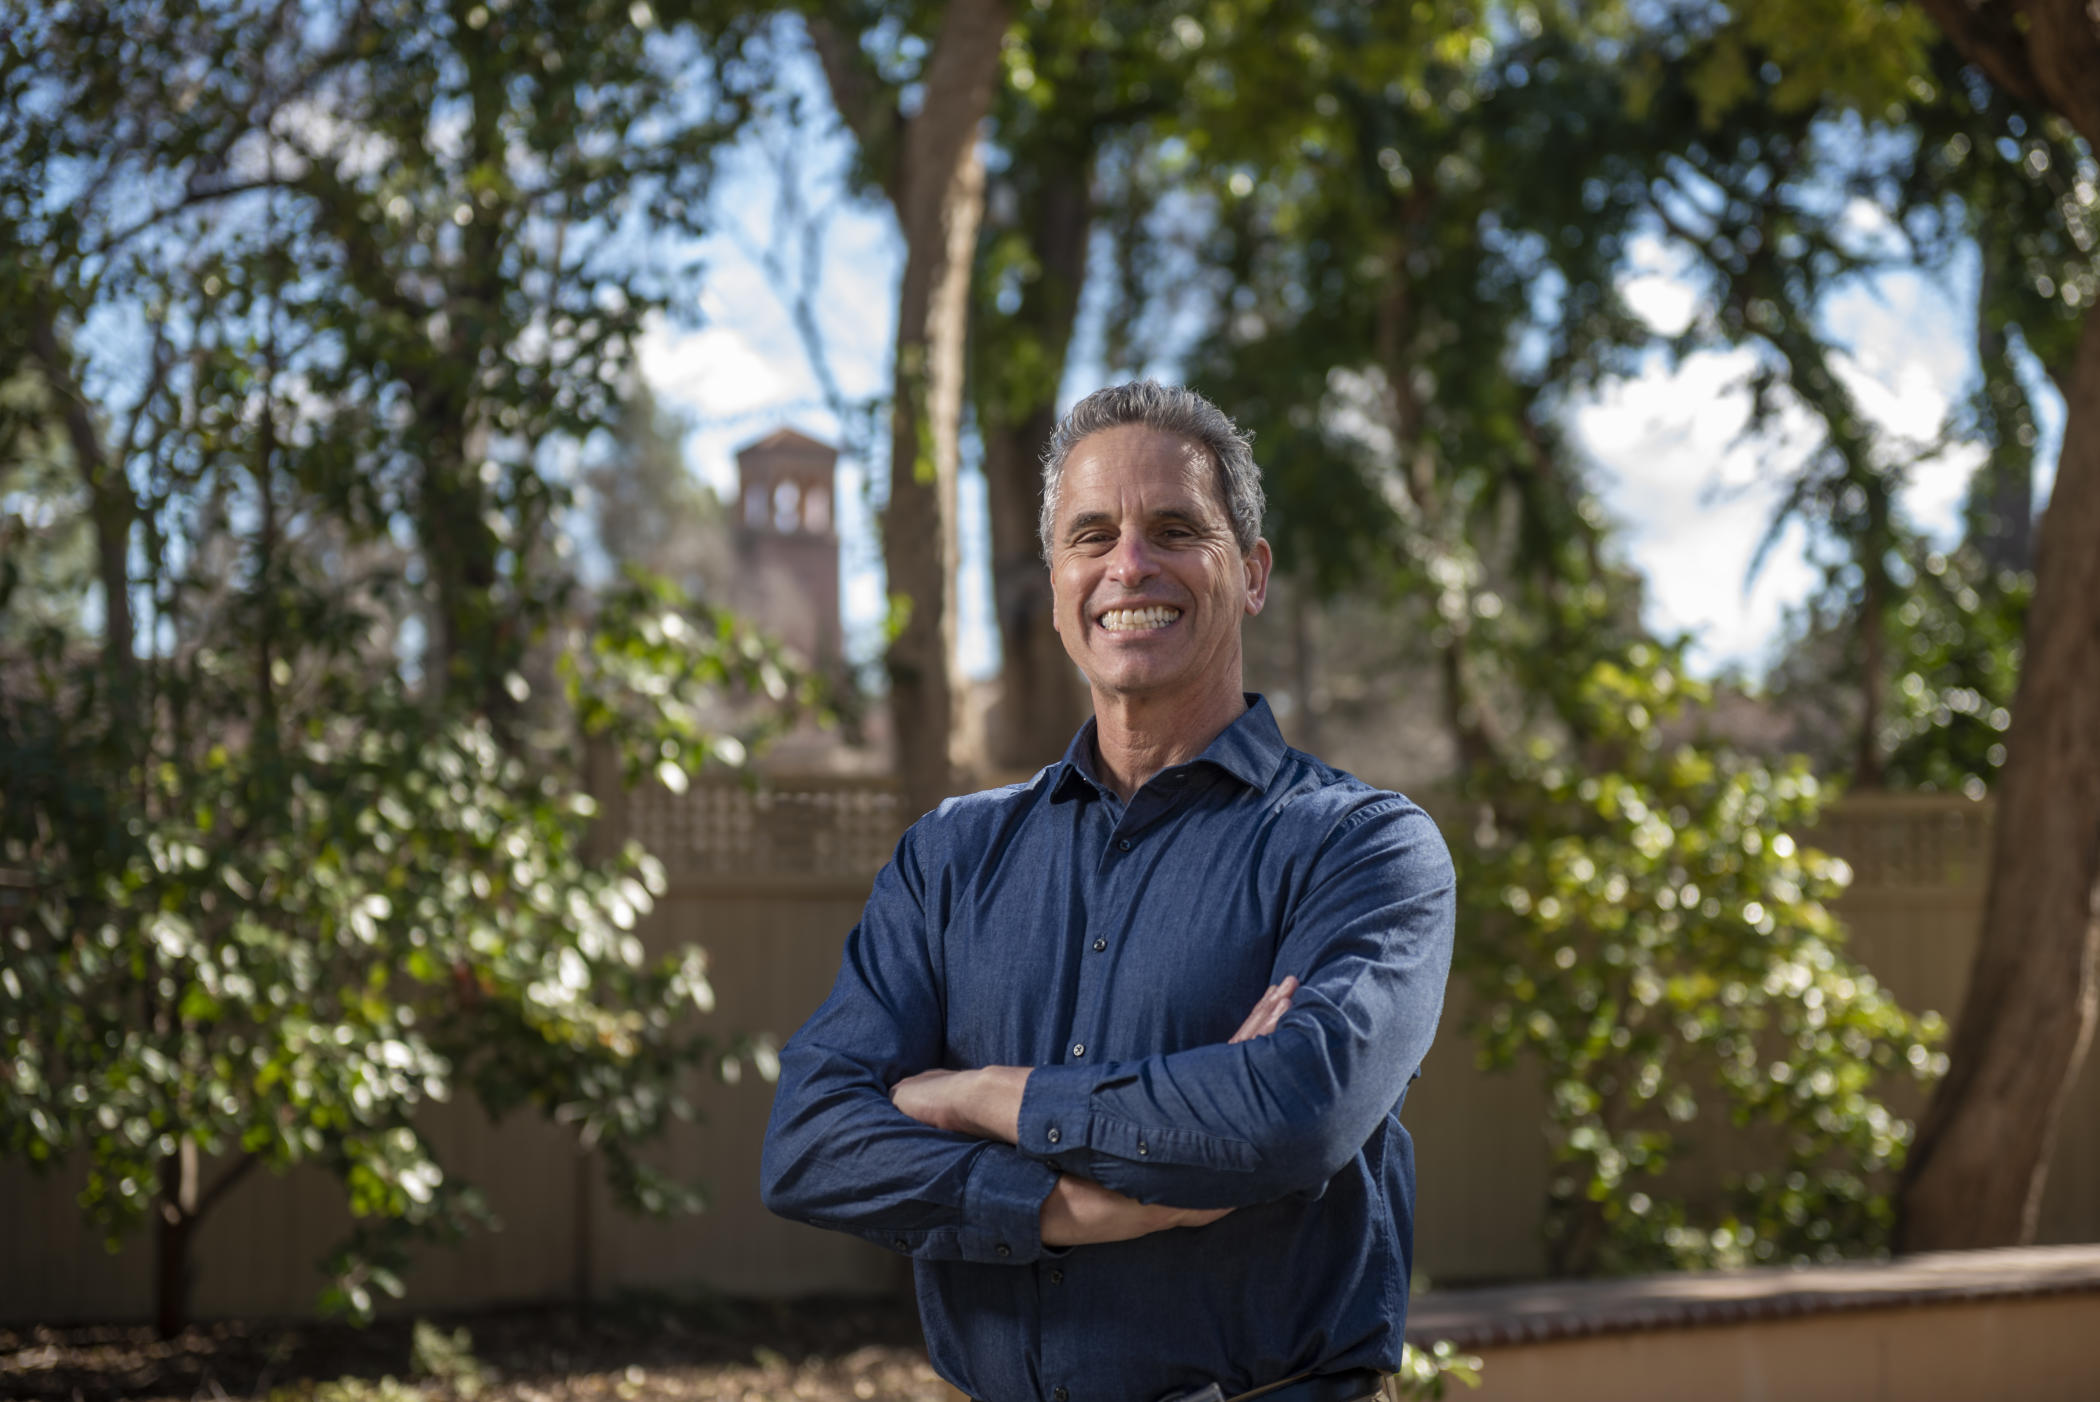 Darryl Schoen smiles with his arms folded in front of trees and Trinity Hall.